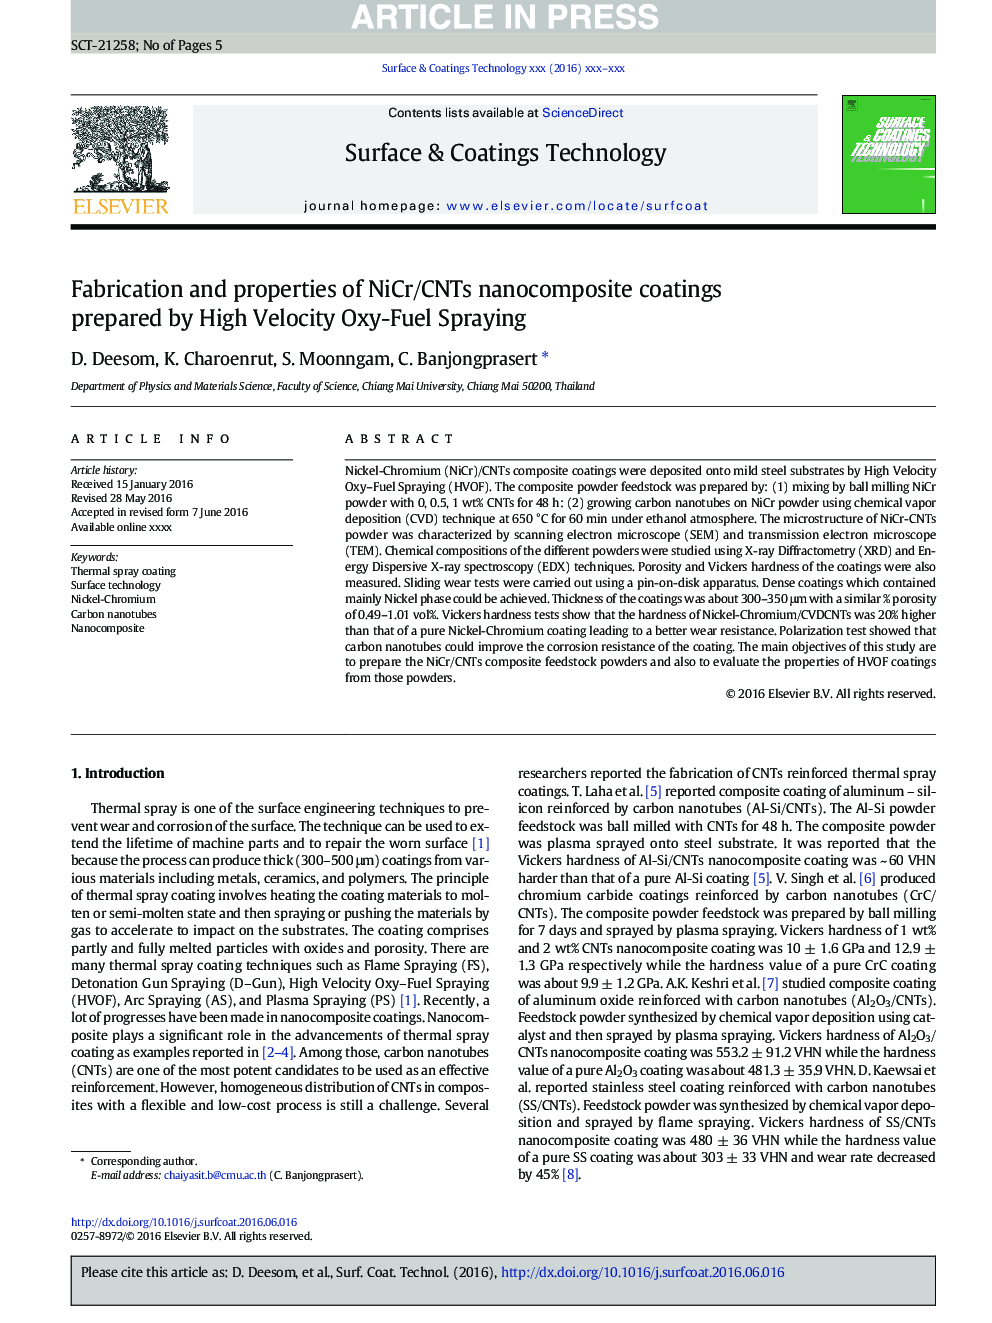 Fabrication and properties of NiCr/CNTs nanocomposite coatings prepared by High Velocity Oxy-Fuel Spraying